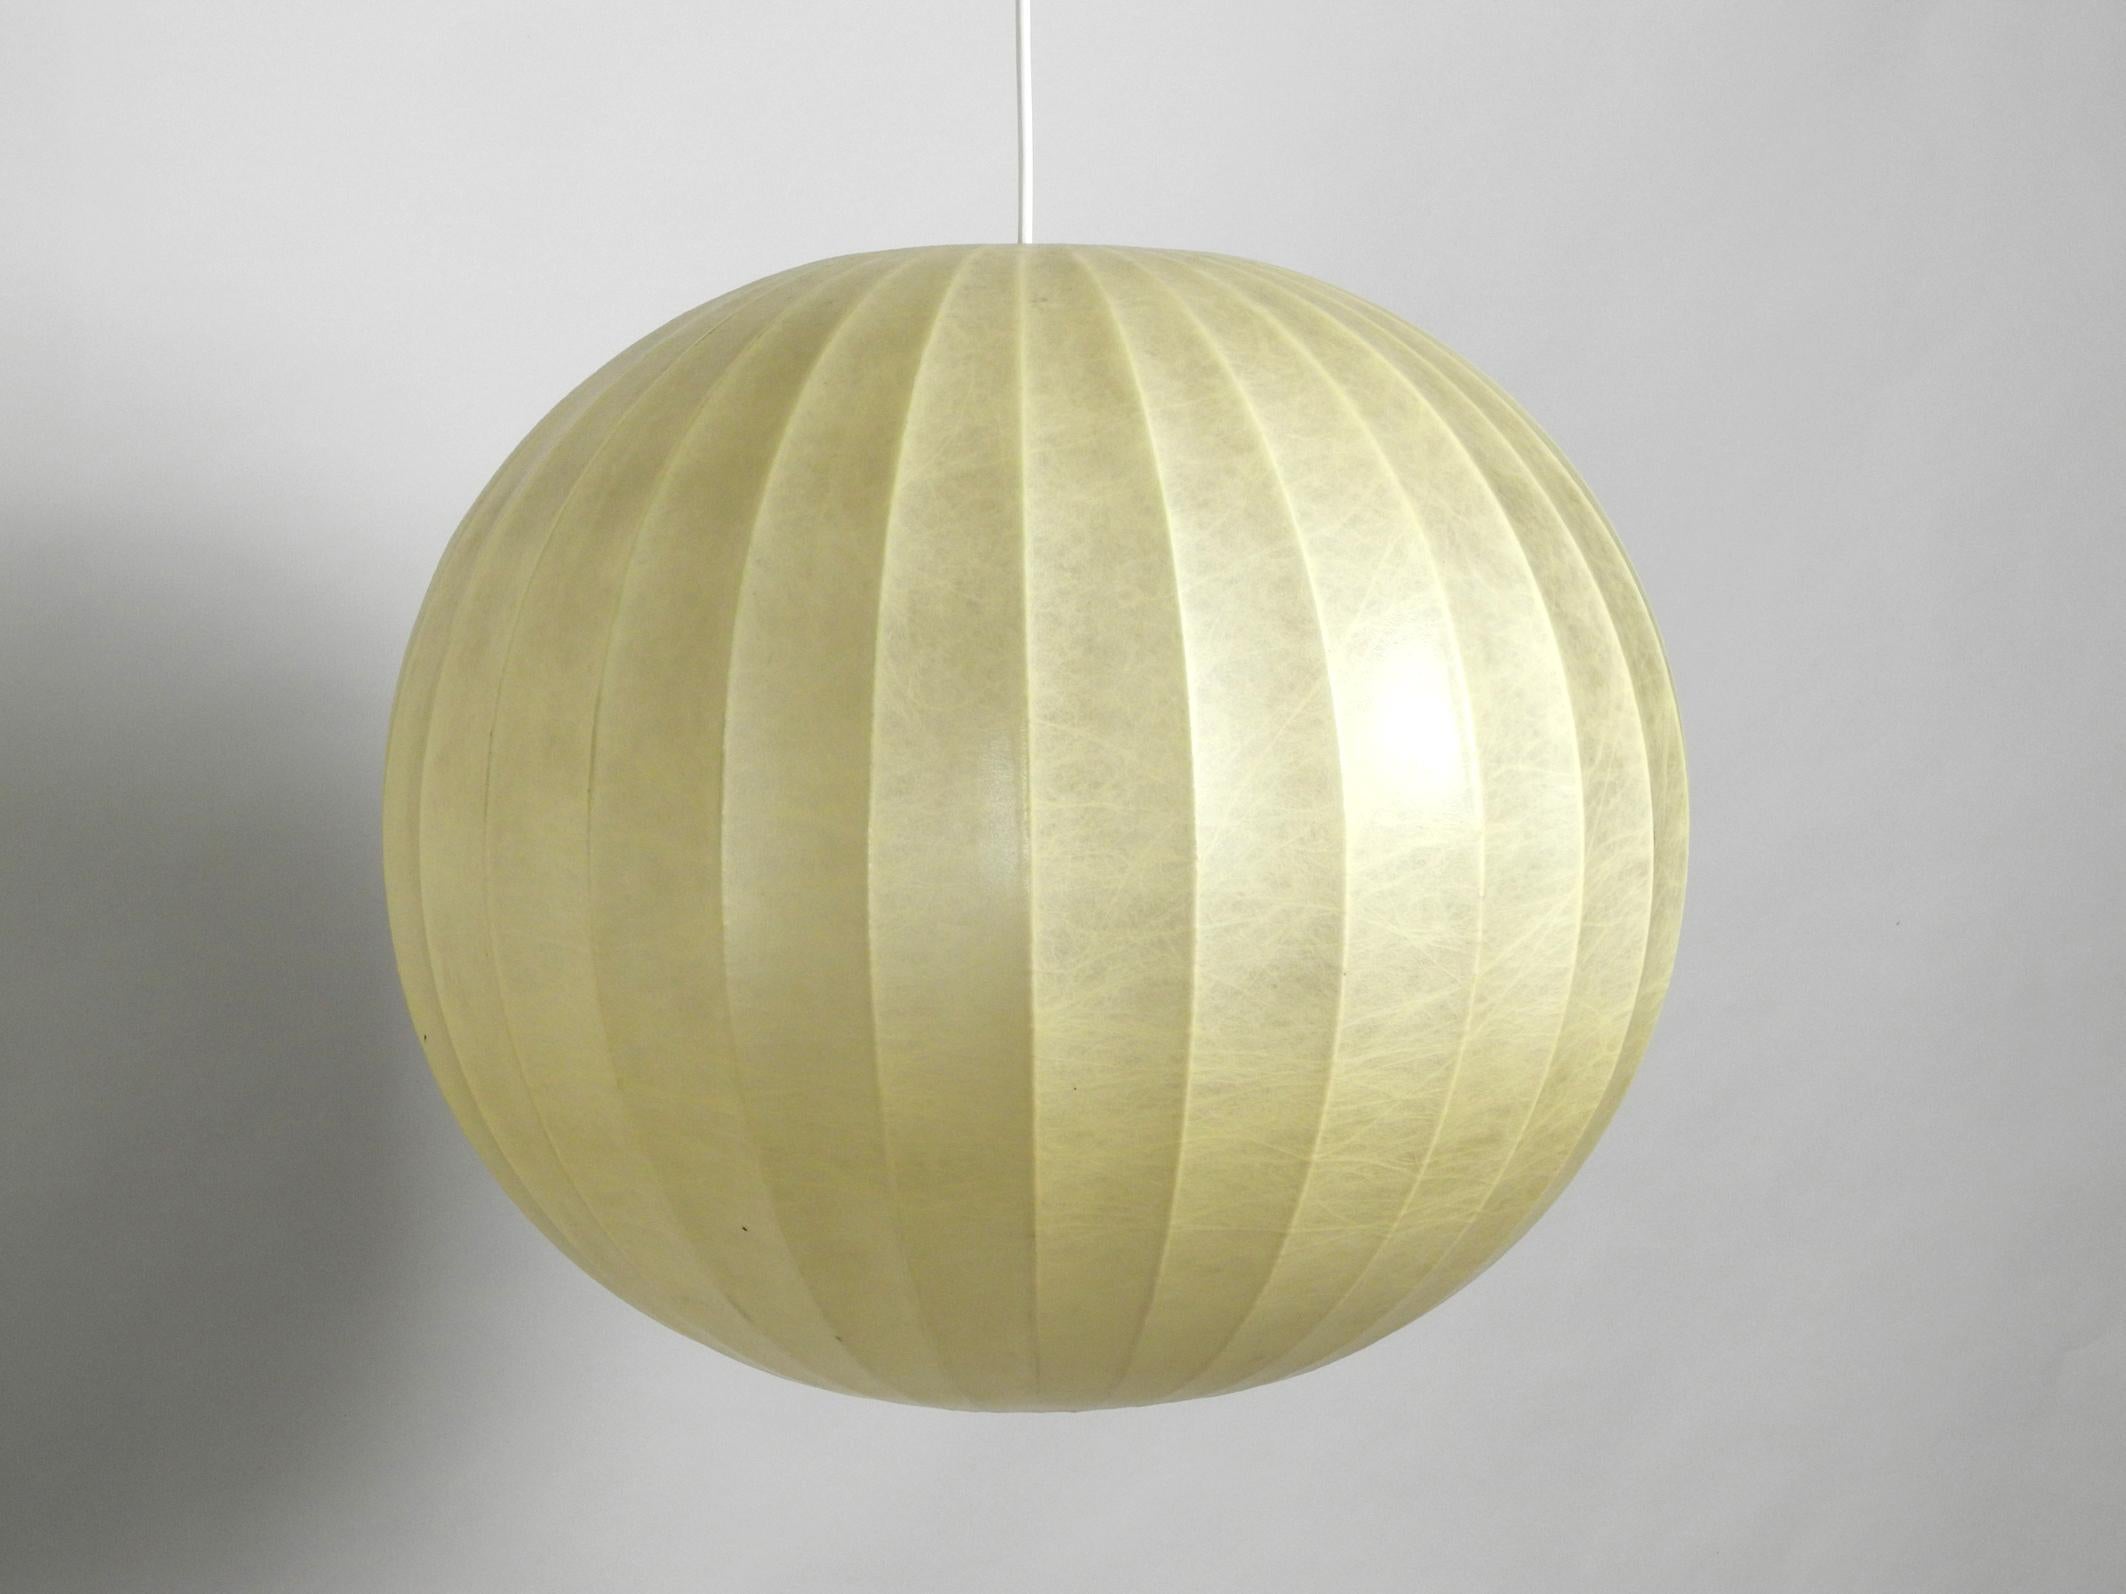 Mid-20th Century Extra Large Cocoon Big Ball Ceiling Lamp in Very Good Original Vintage Condition